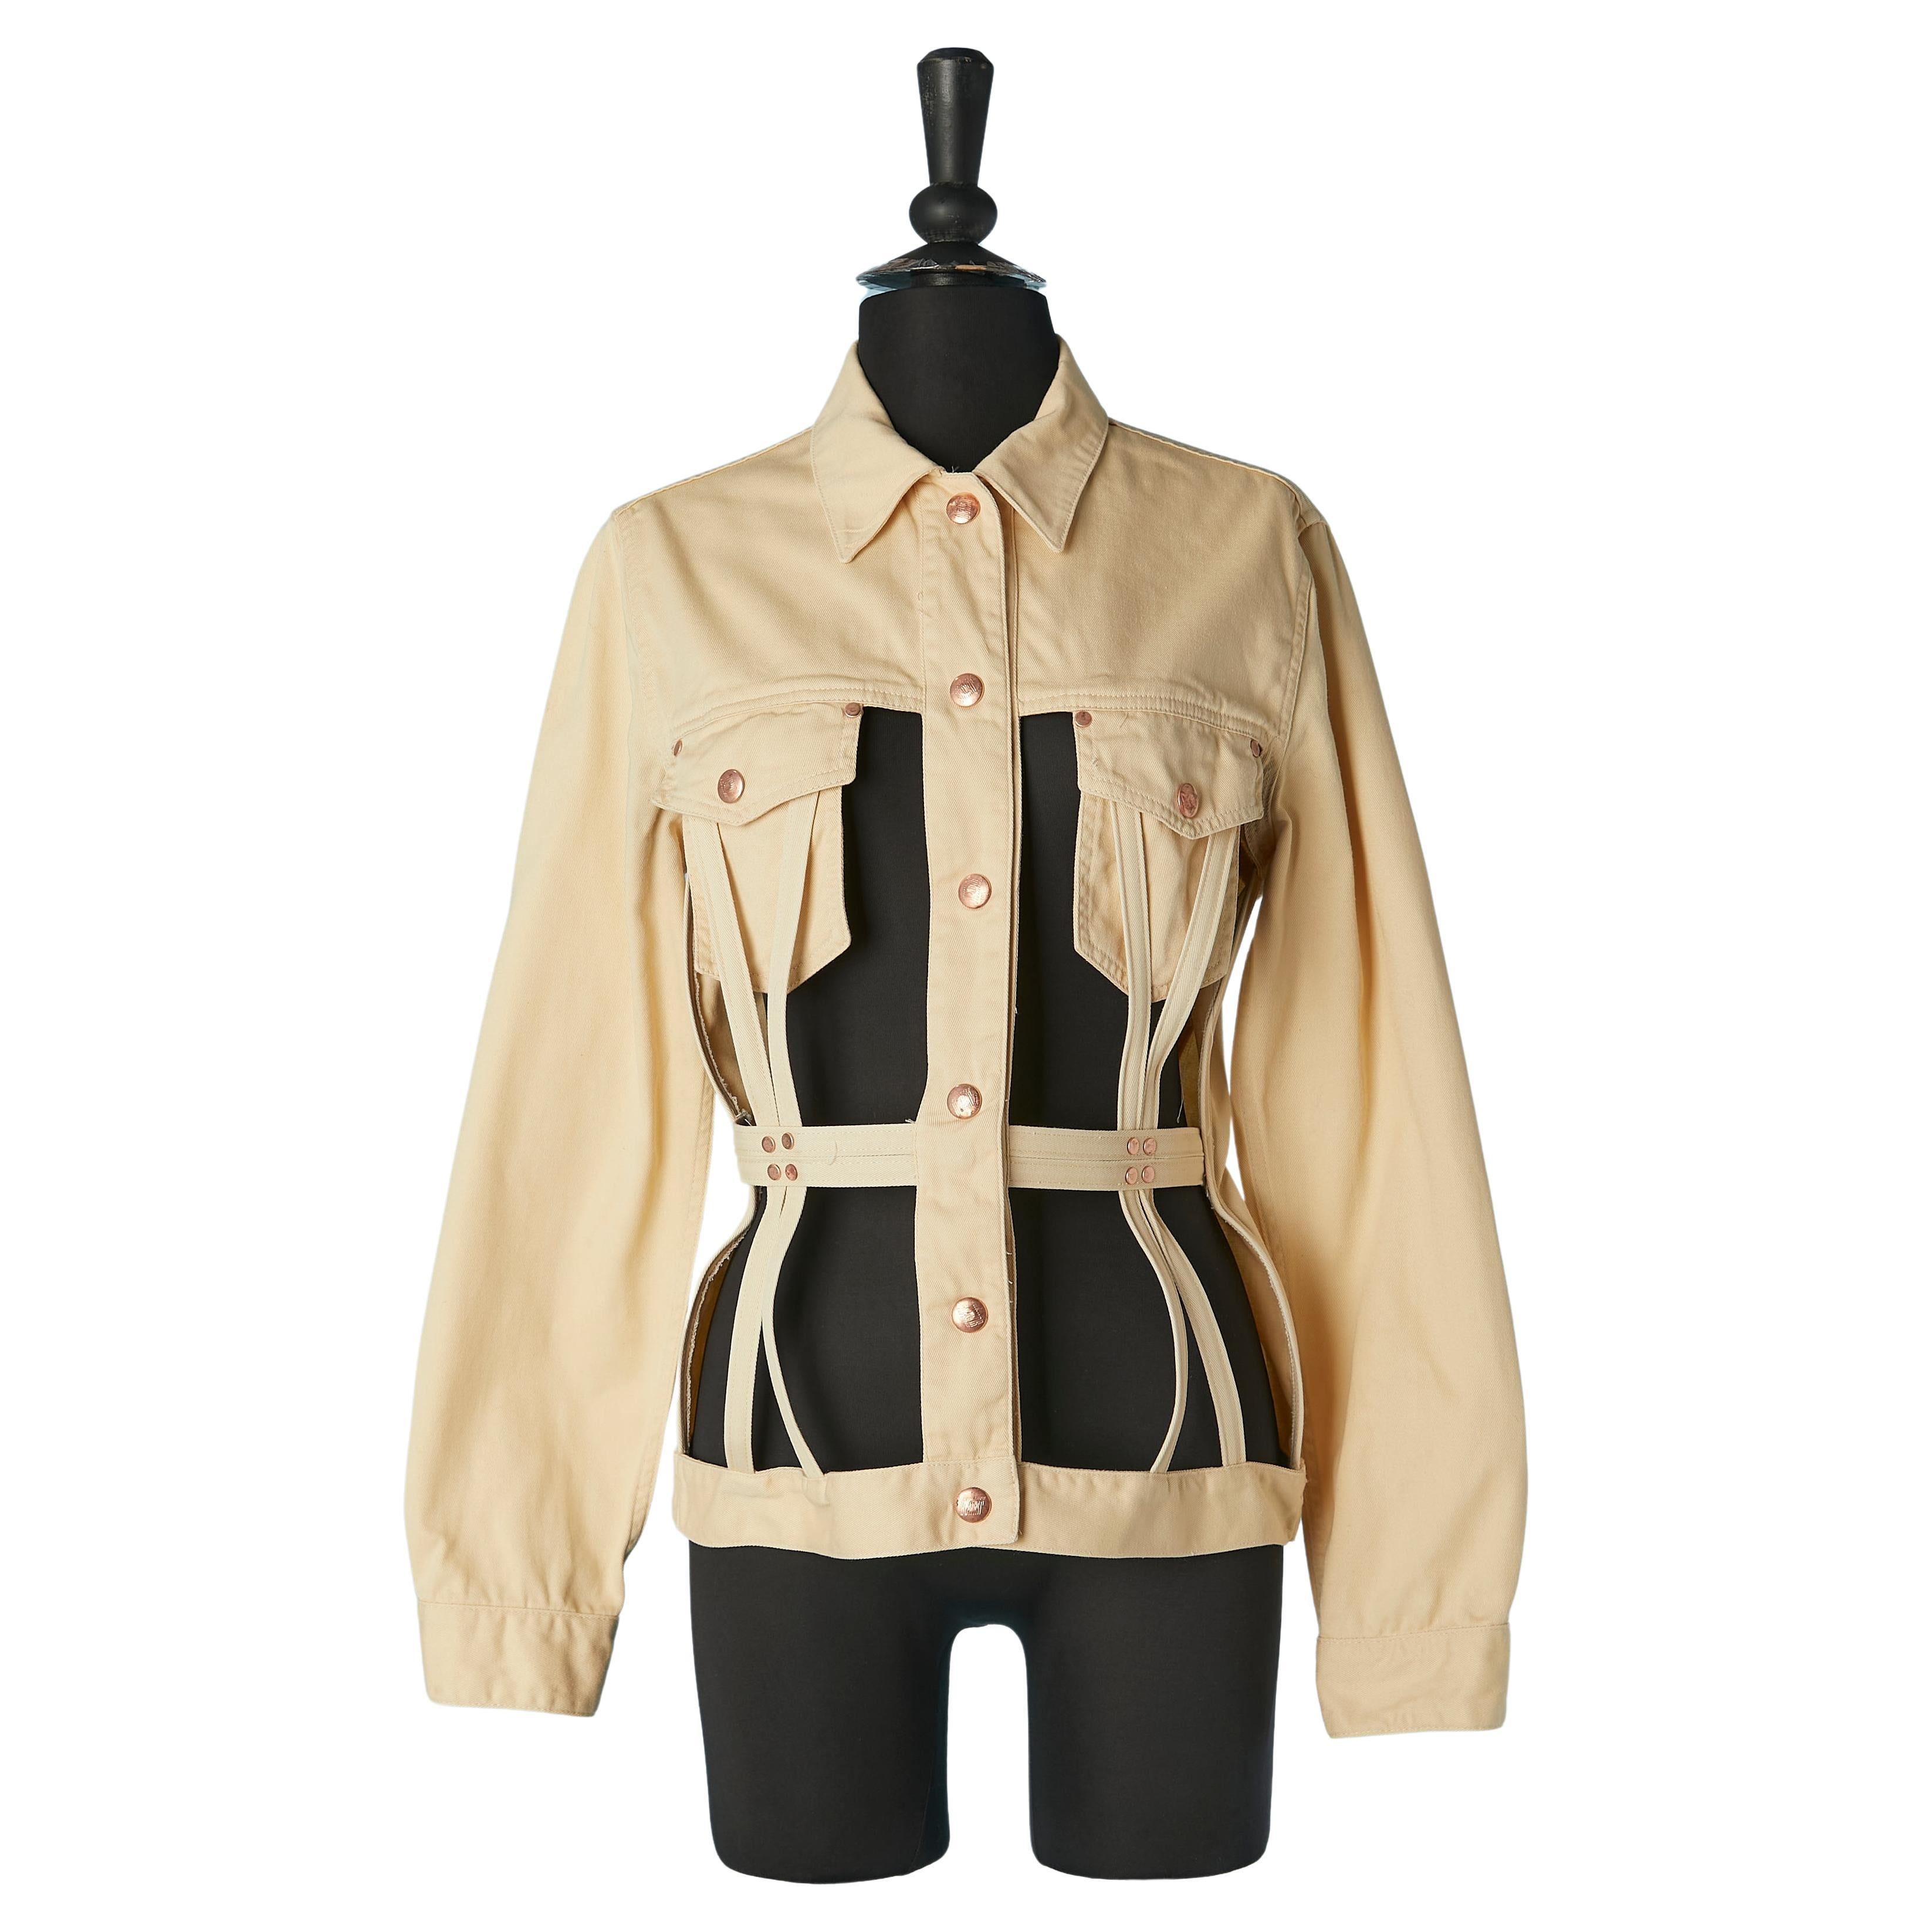 Iconic "cage" jacket in beige cotton with branded snap closure  GAULTIER JUNIOR  For Sale